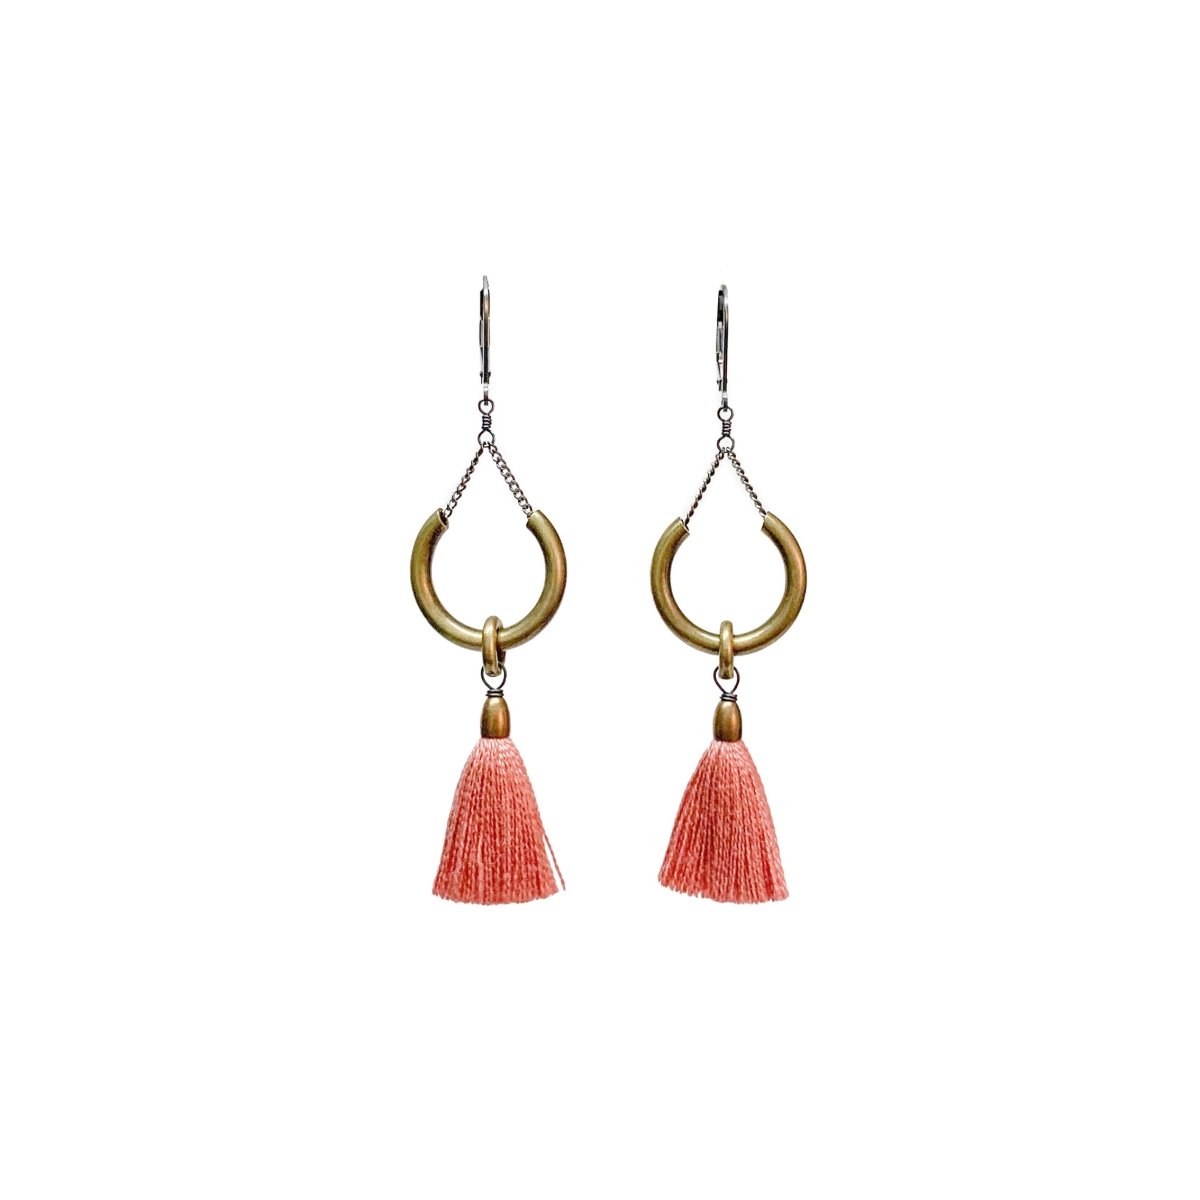 A pair of earrings with silver clasps, a brass ring and blush pink tassels. The Duster Earrings in Shell are from Portland designer Emily Bixler of BOET.